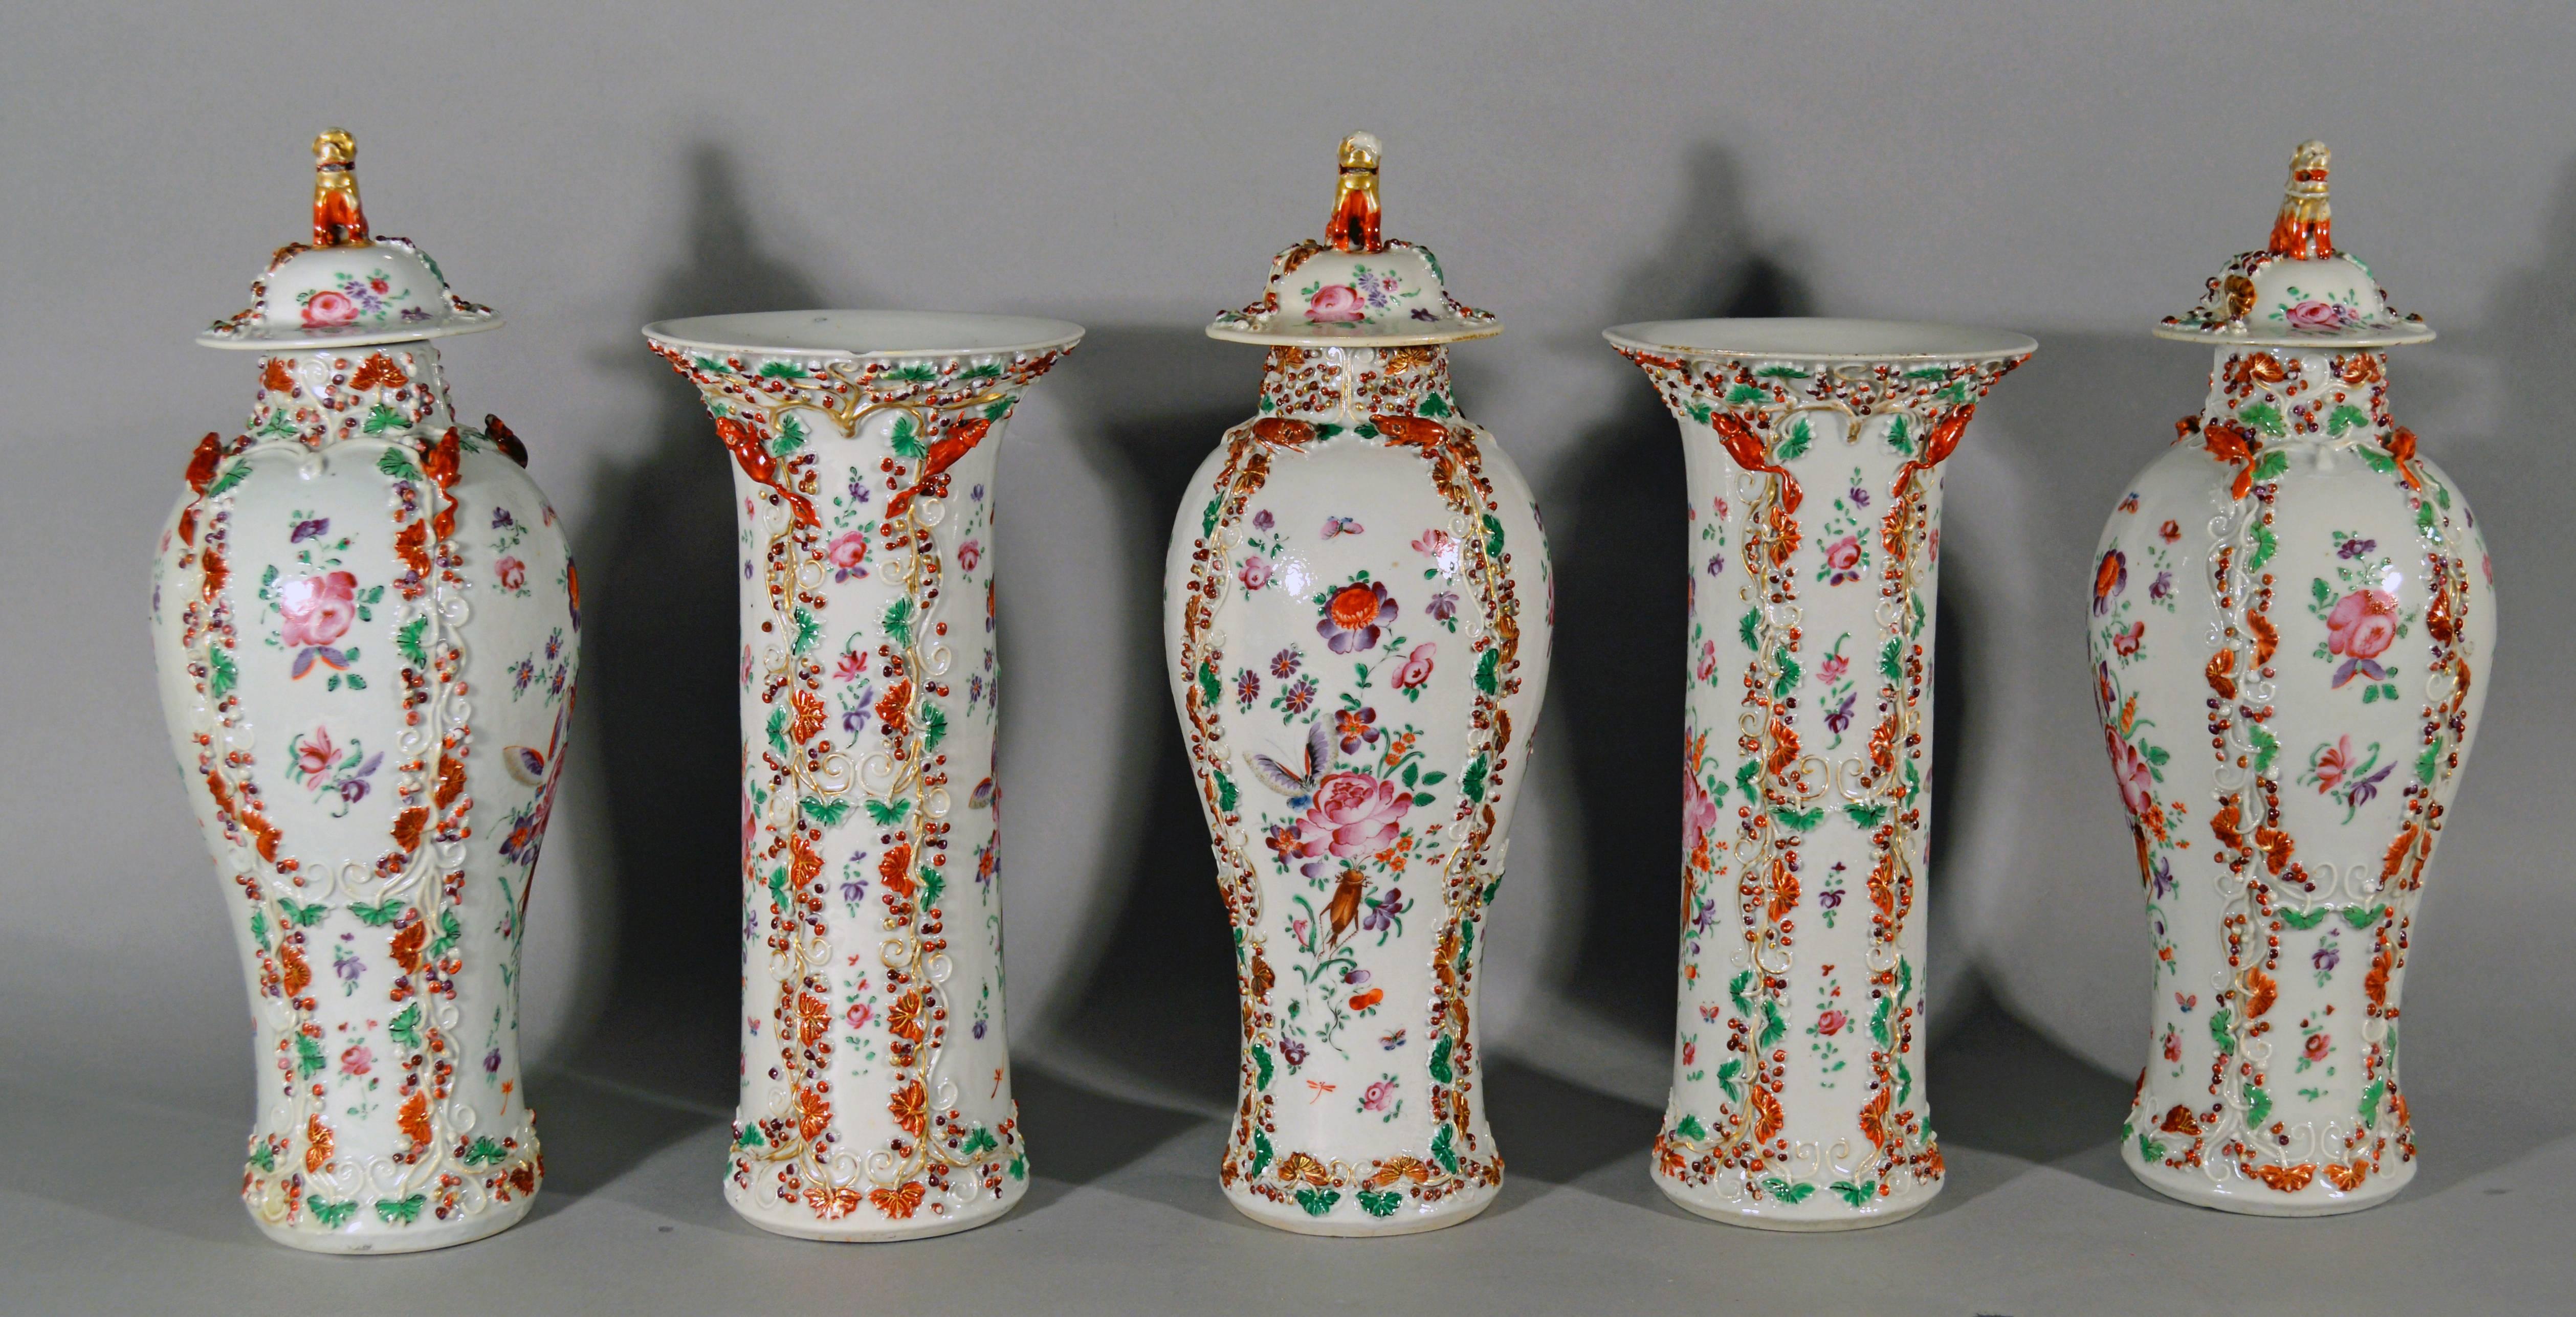 Hand-Painted 18th Century Chinese Export Five-Piece Famille Rose Porcelain Garniture of Vases